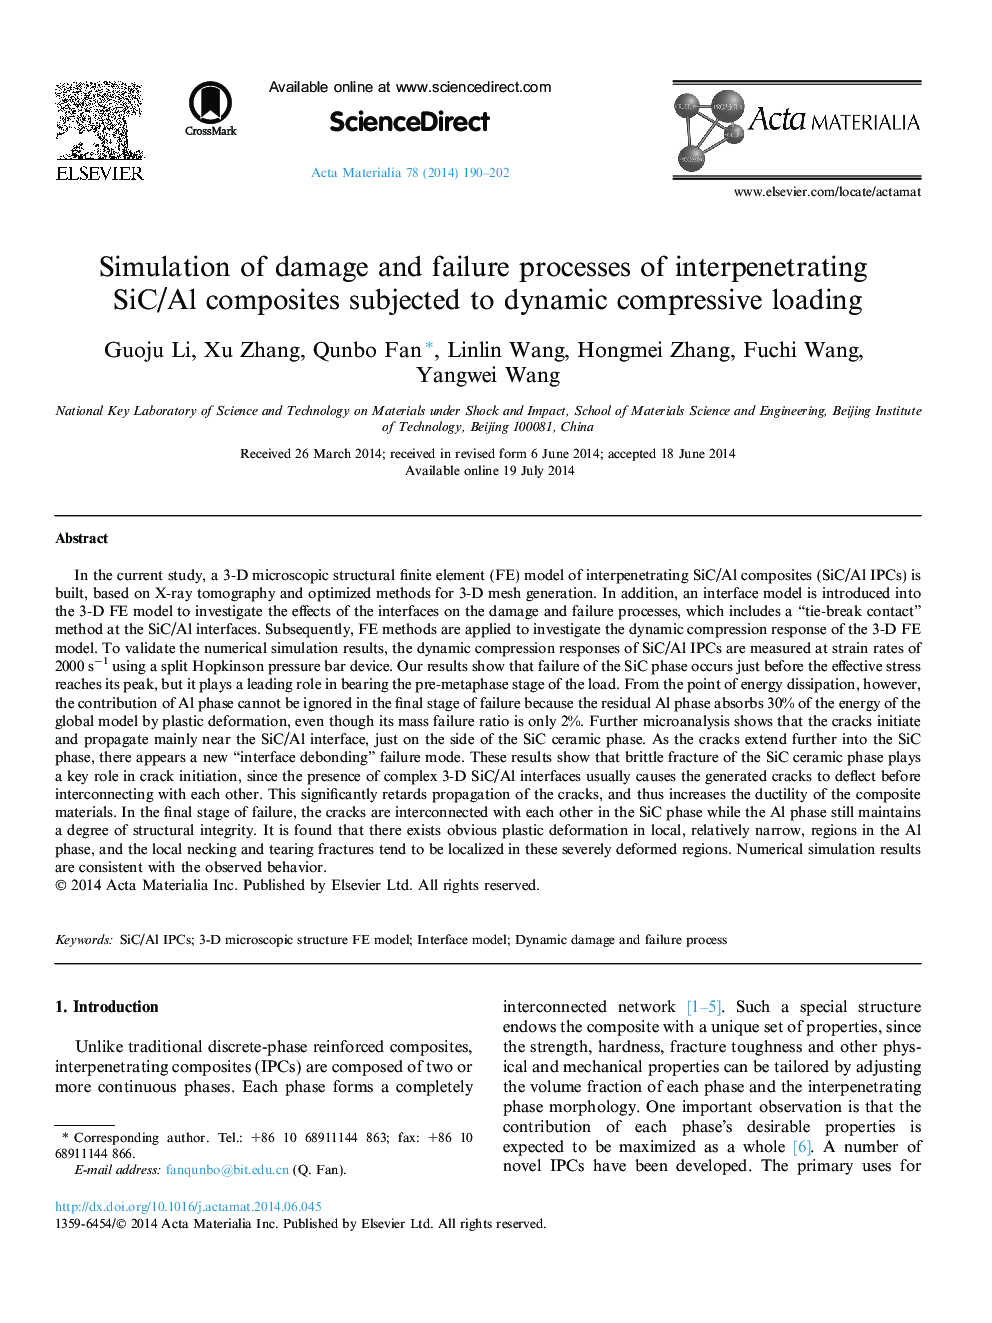 Simulation of damage and failure processes of interpenetrating SiC/Al composites subjected to dynamic compressive loading